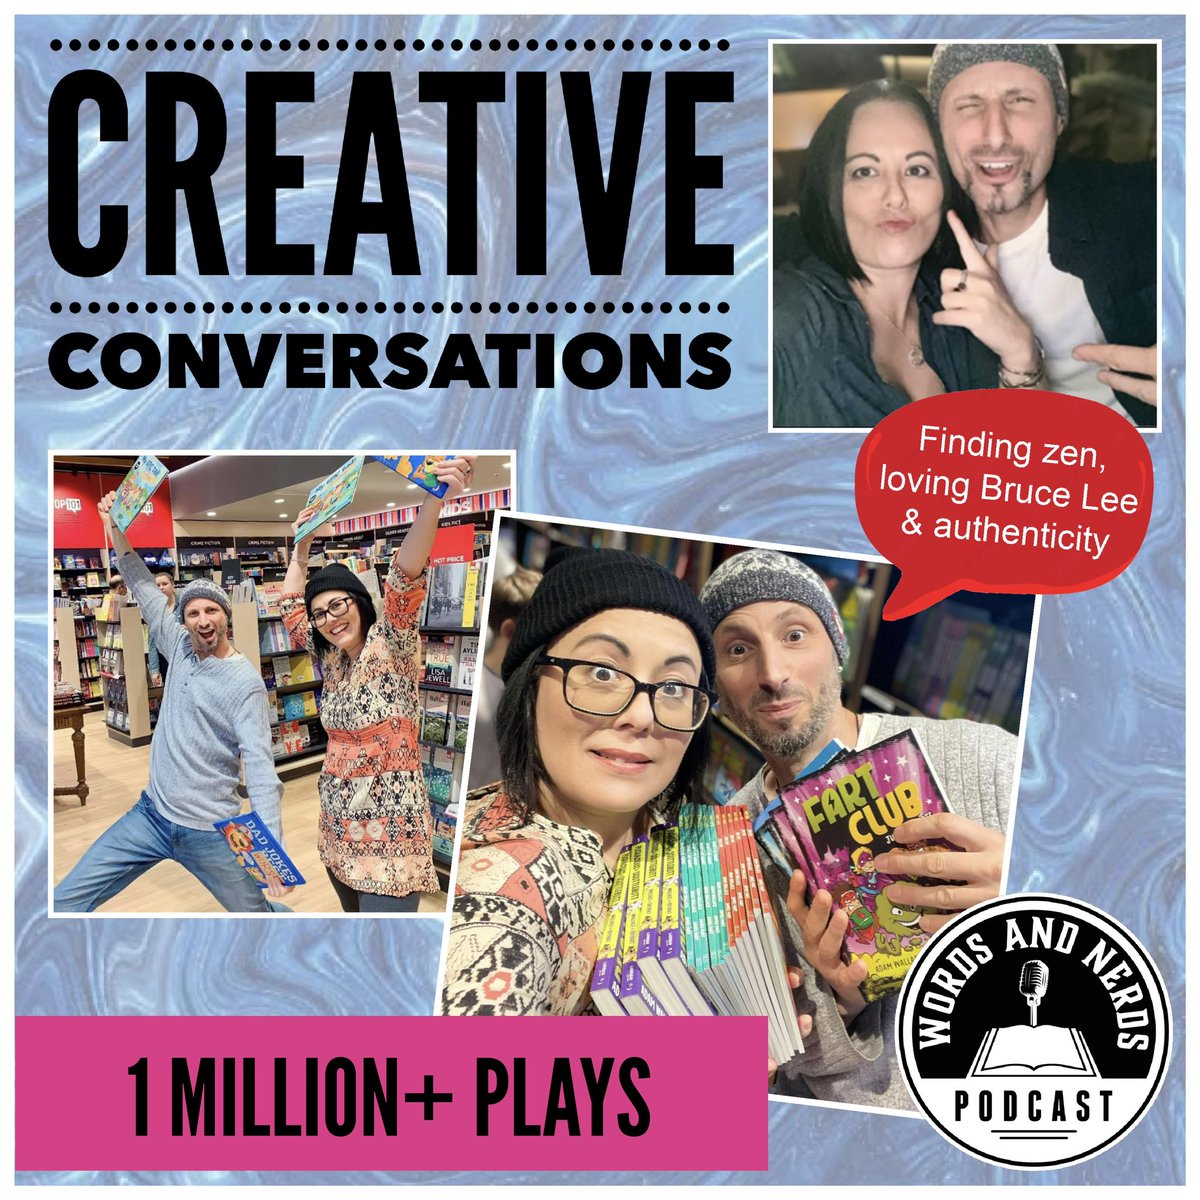 NEW Creative Conversation with Adam Wallace and Dani Vee. Unscripted and uncensored, what could go wrong? Adam has sold millions of books around the world. We talk about a shared love of Bruce Lee, zen & authenticity. podcasts.apple.com/au/podcast/wor…